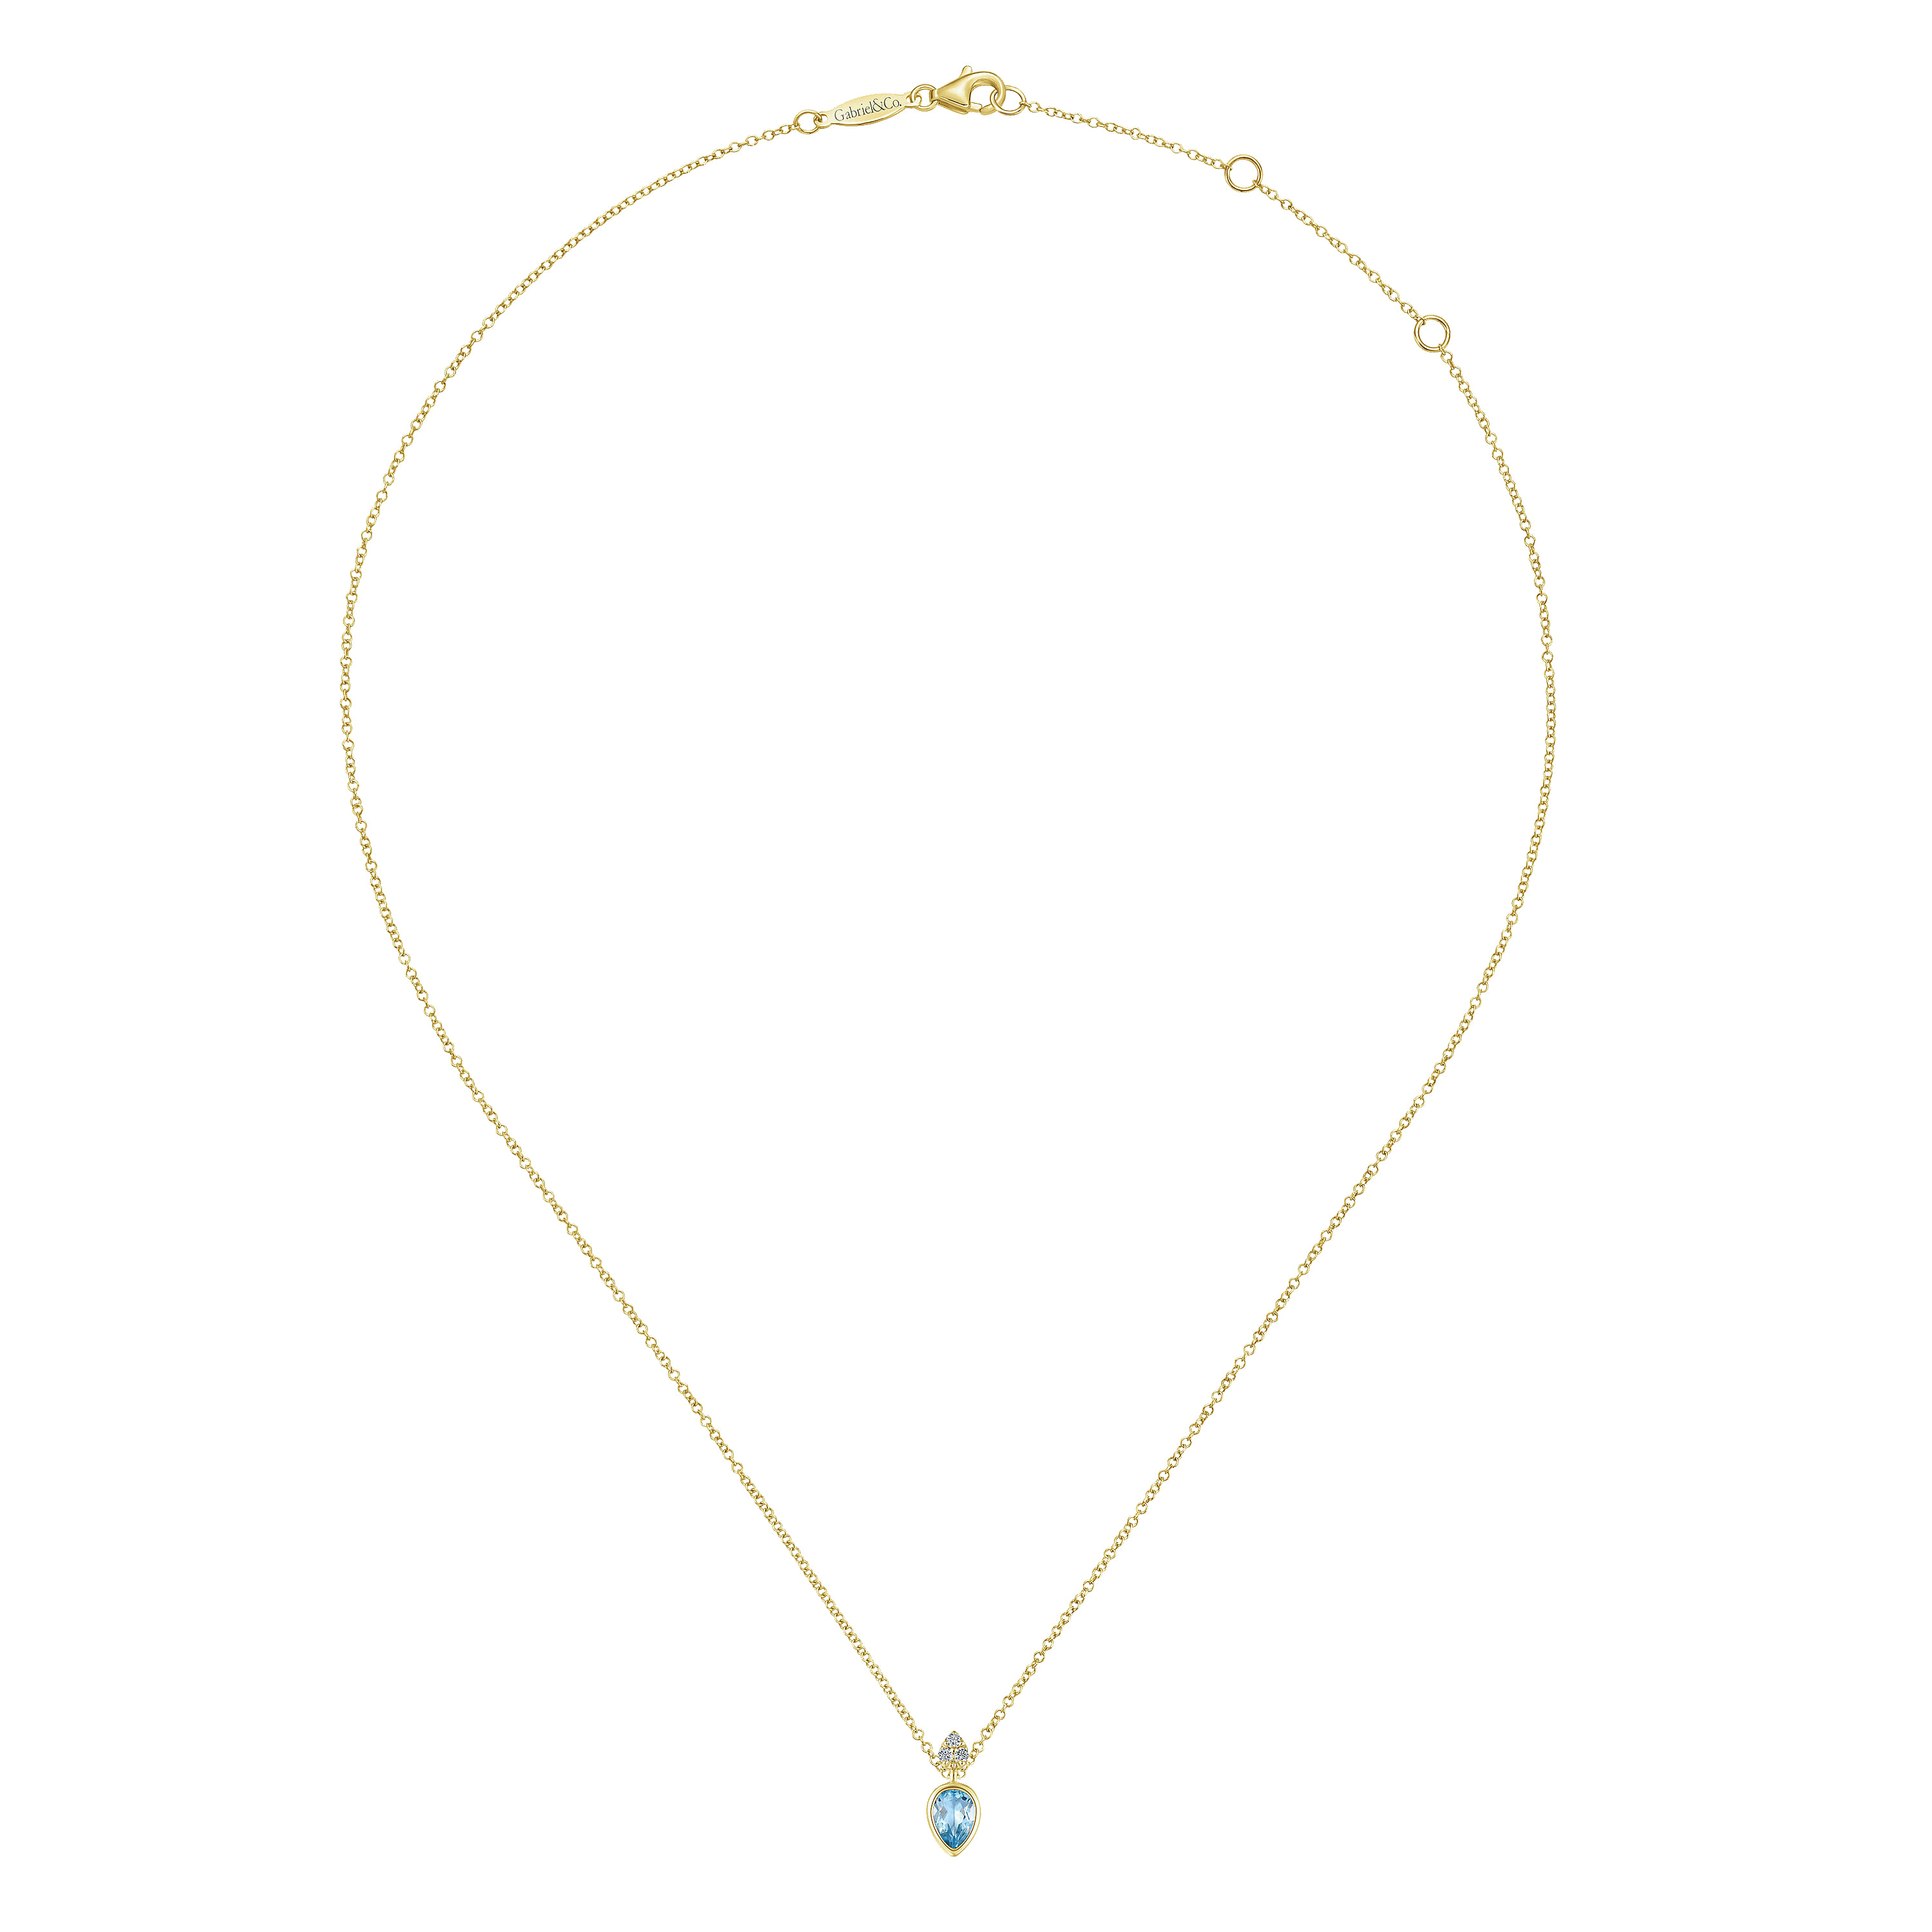 14K Yellow Gold Pear Shape Blue Topaz Pendant Necklace with Diamond Accents